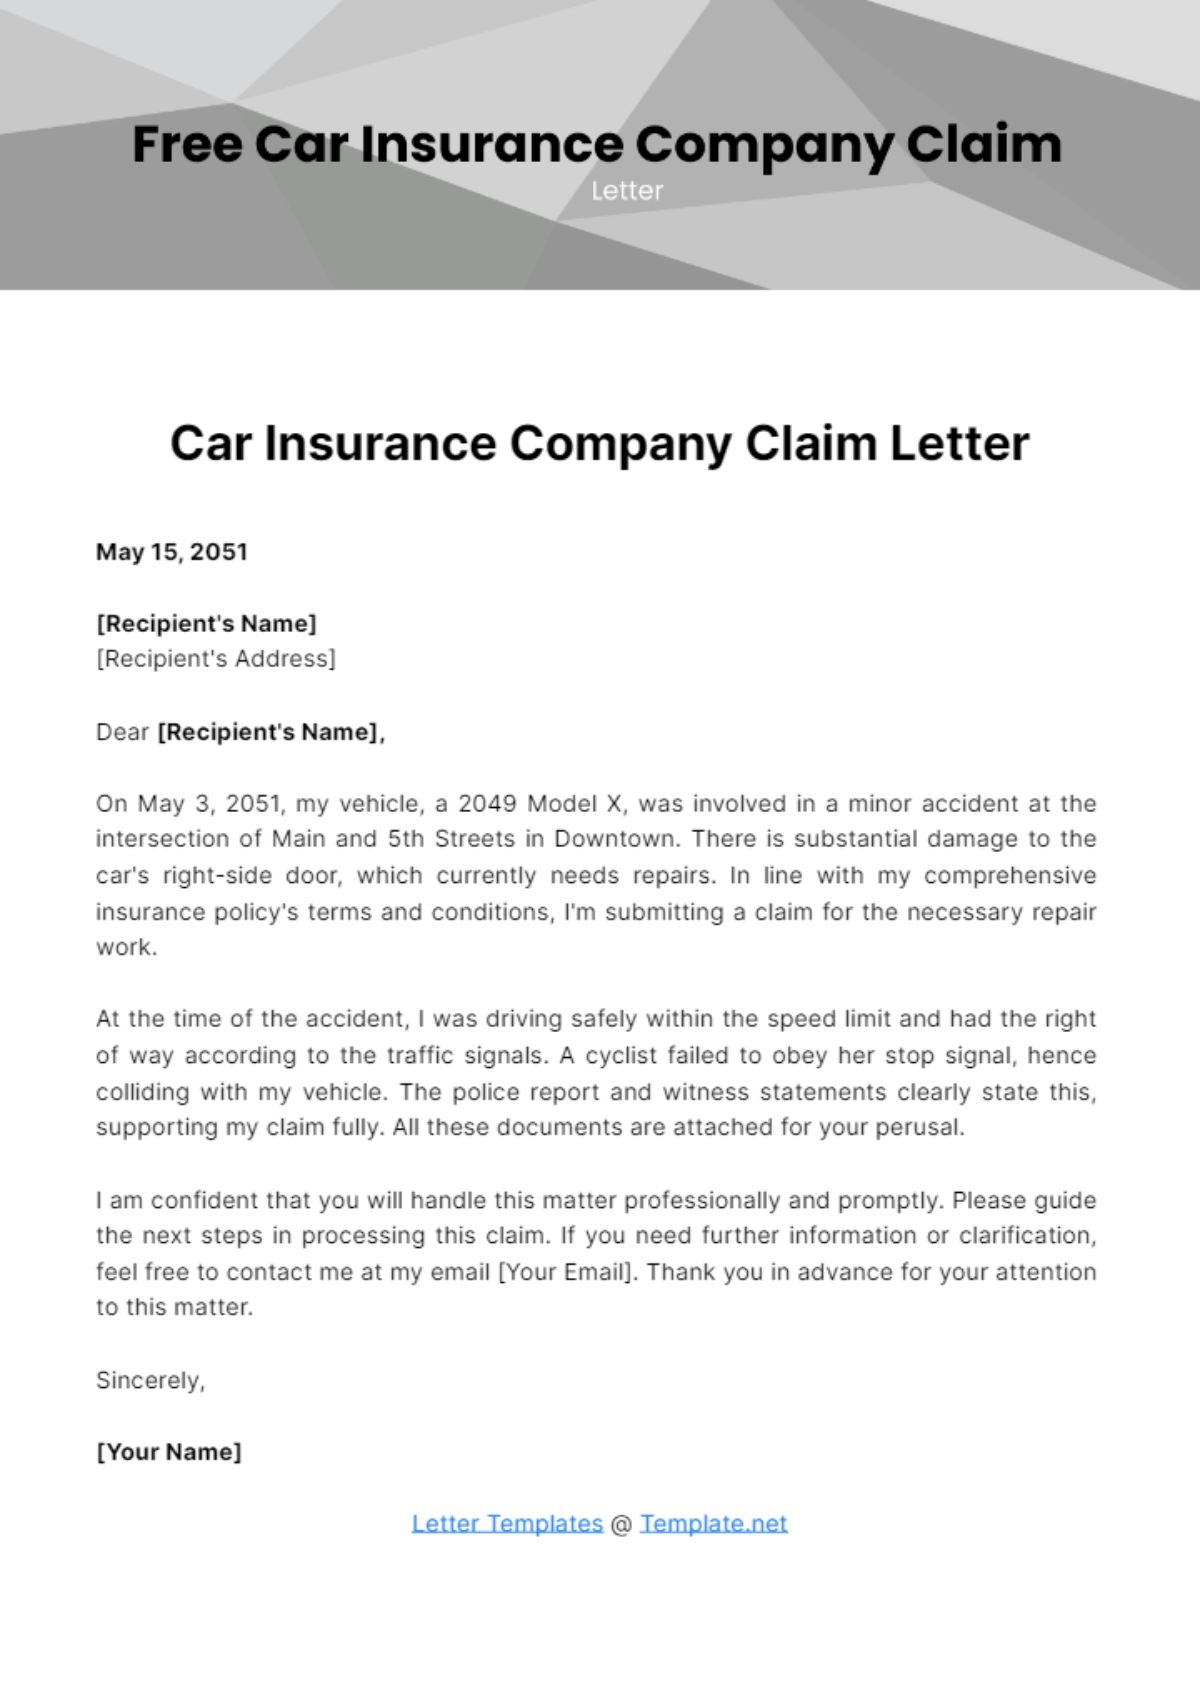 Car Insurance Company Claim Letter Template